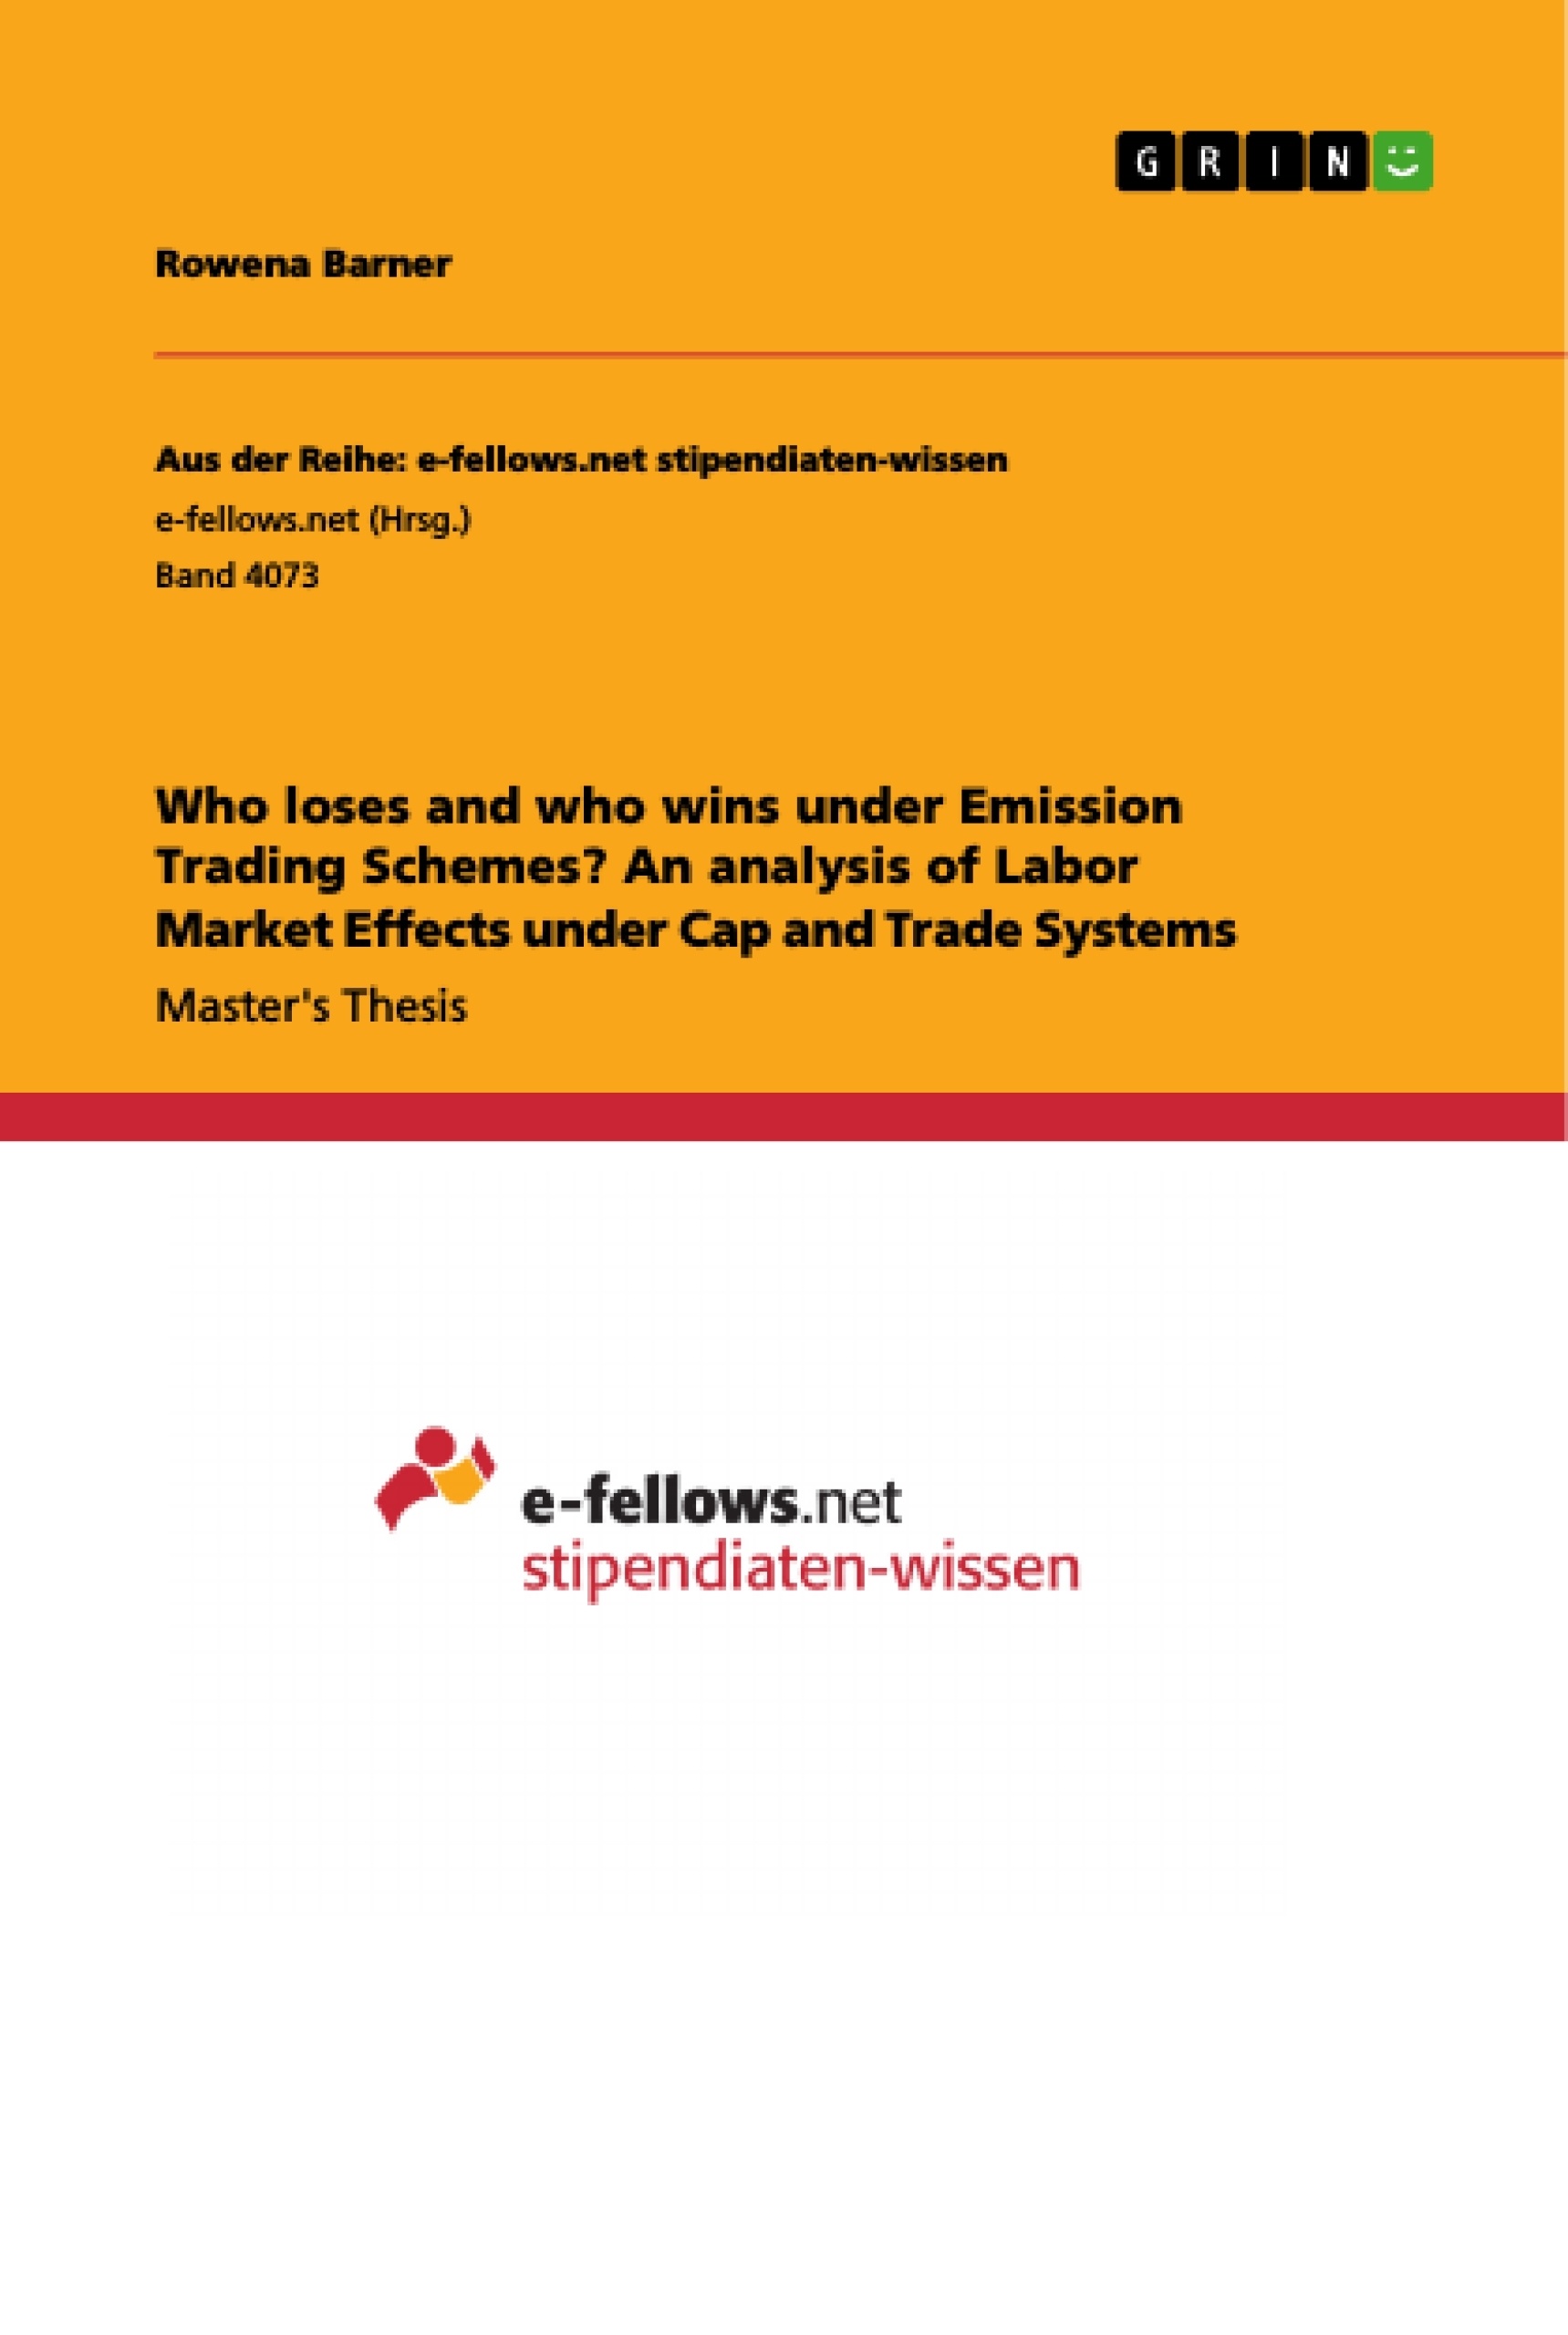 Title: Who loses and who wins under Emission Trading Schemes? An analysis of Labor Market Effects under Cap and Trade Systems